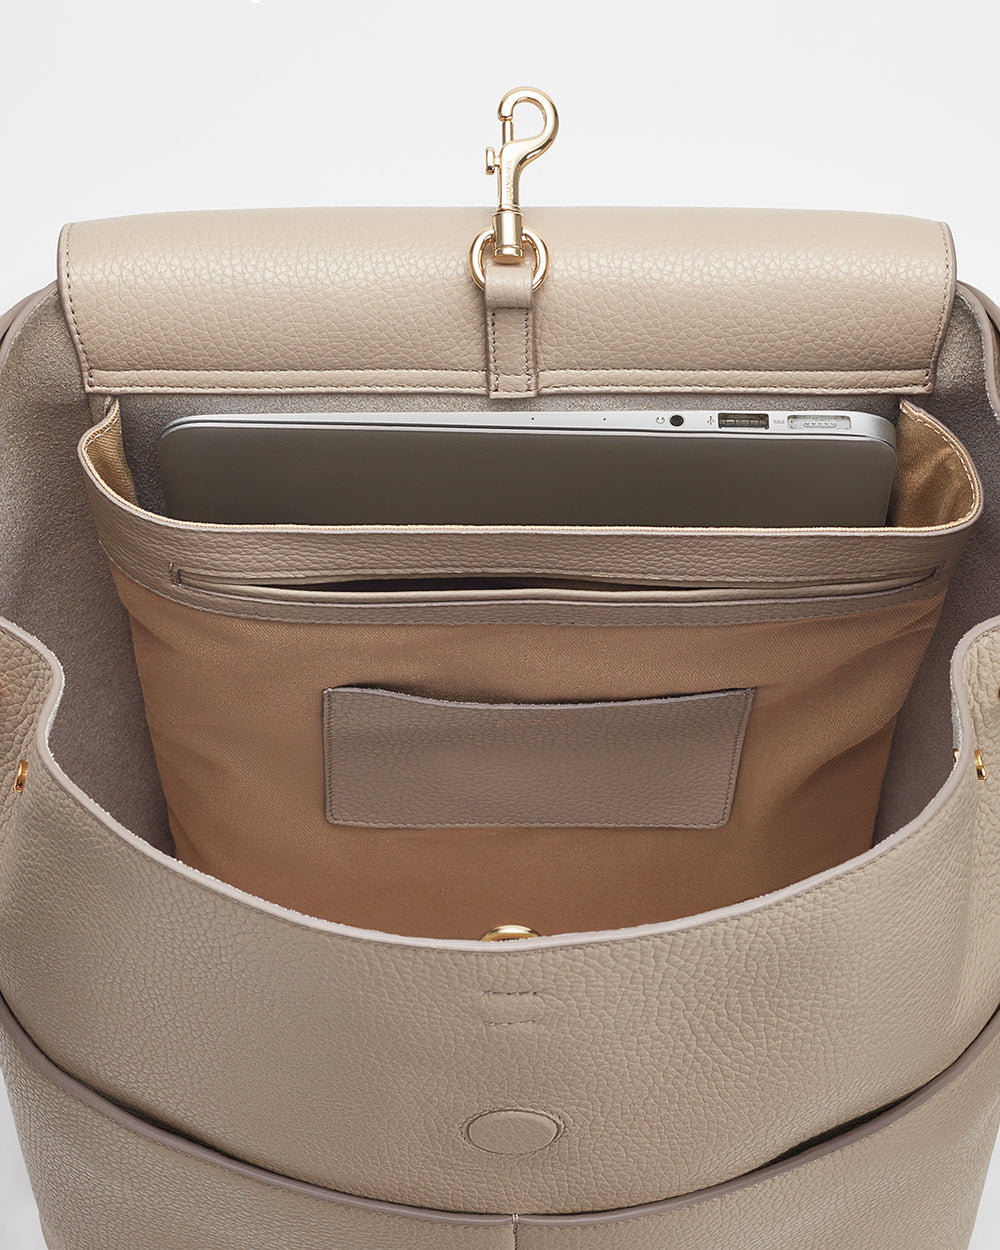 Open handbag with a laptop and smartphone inside.